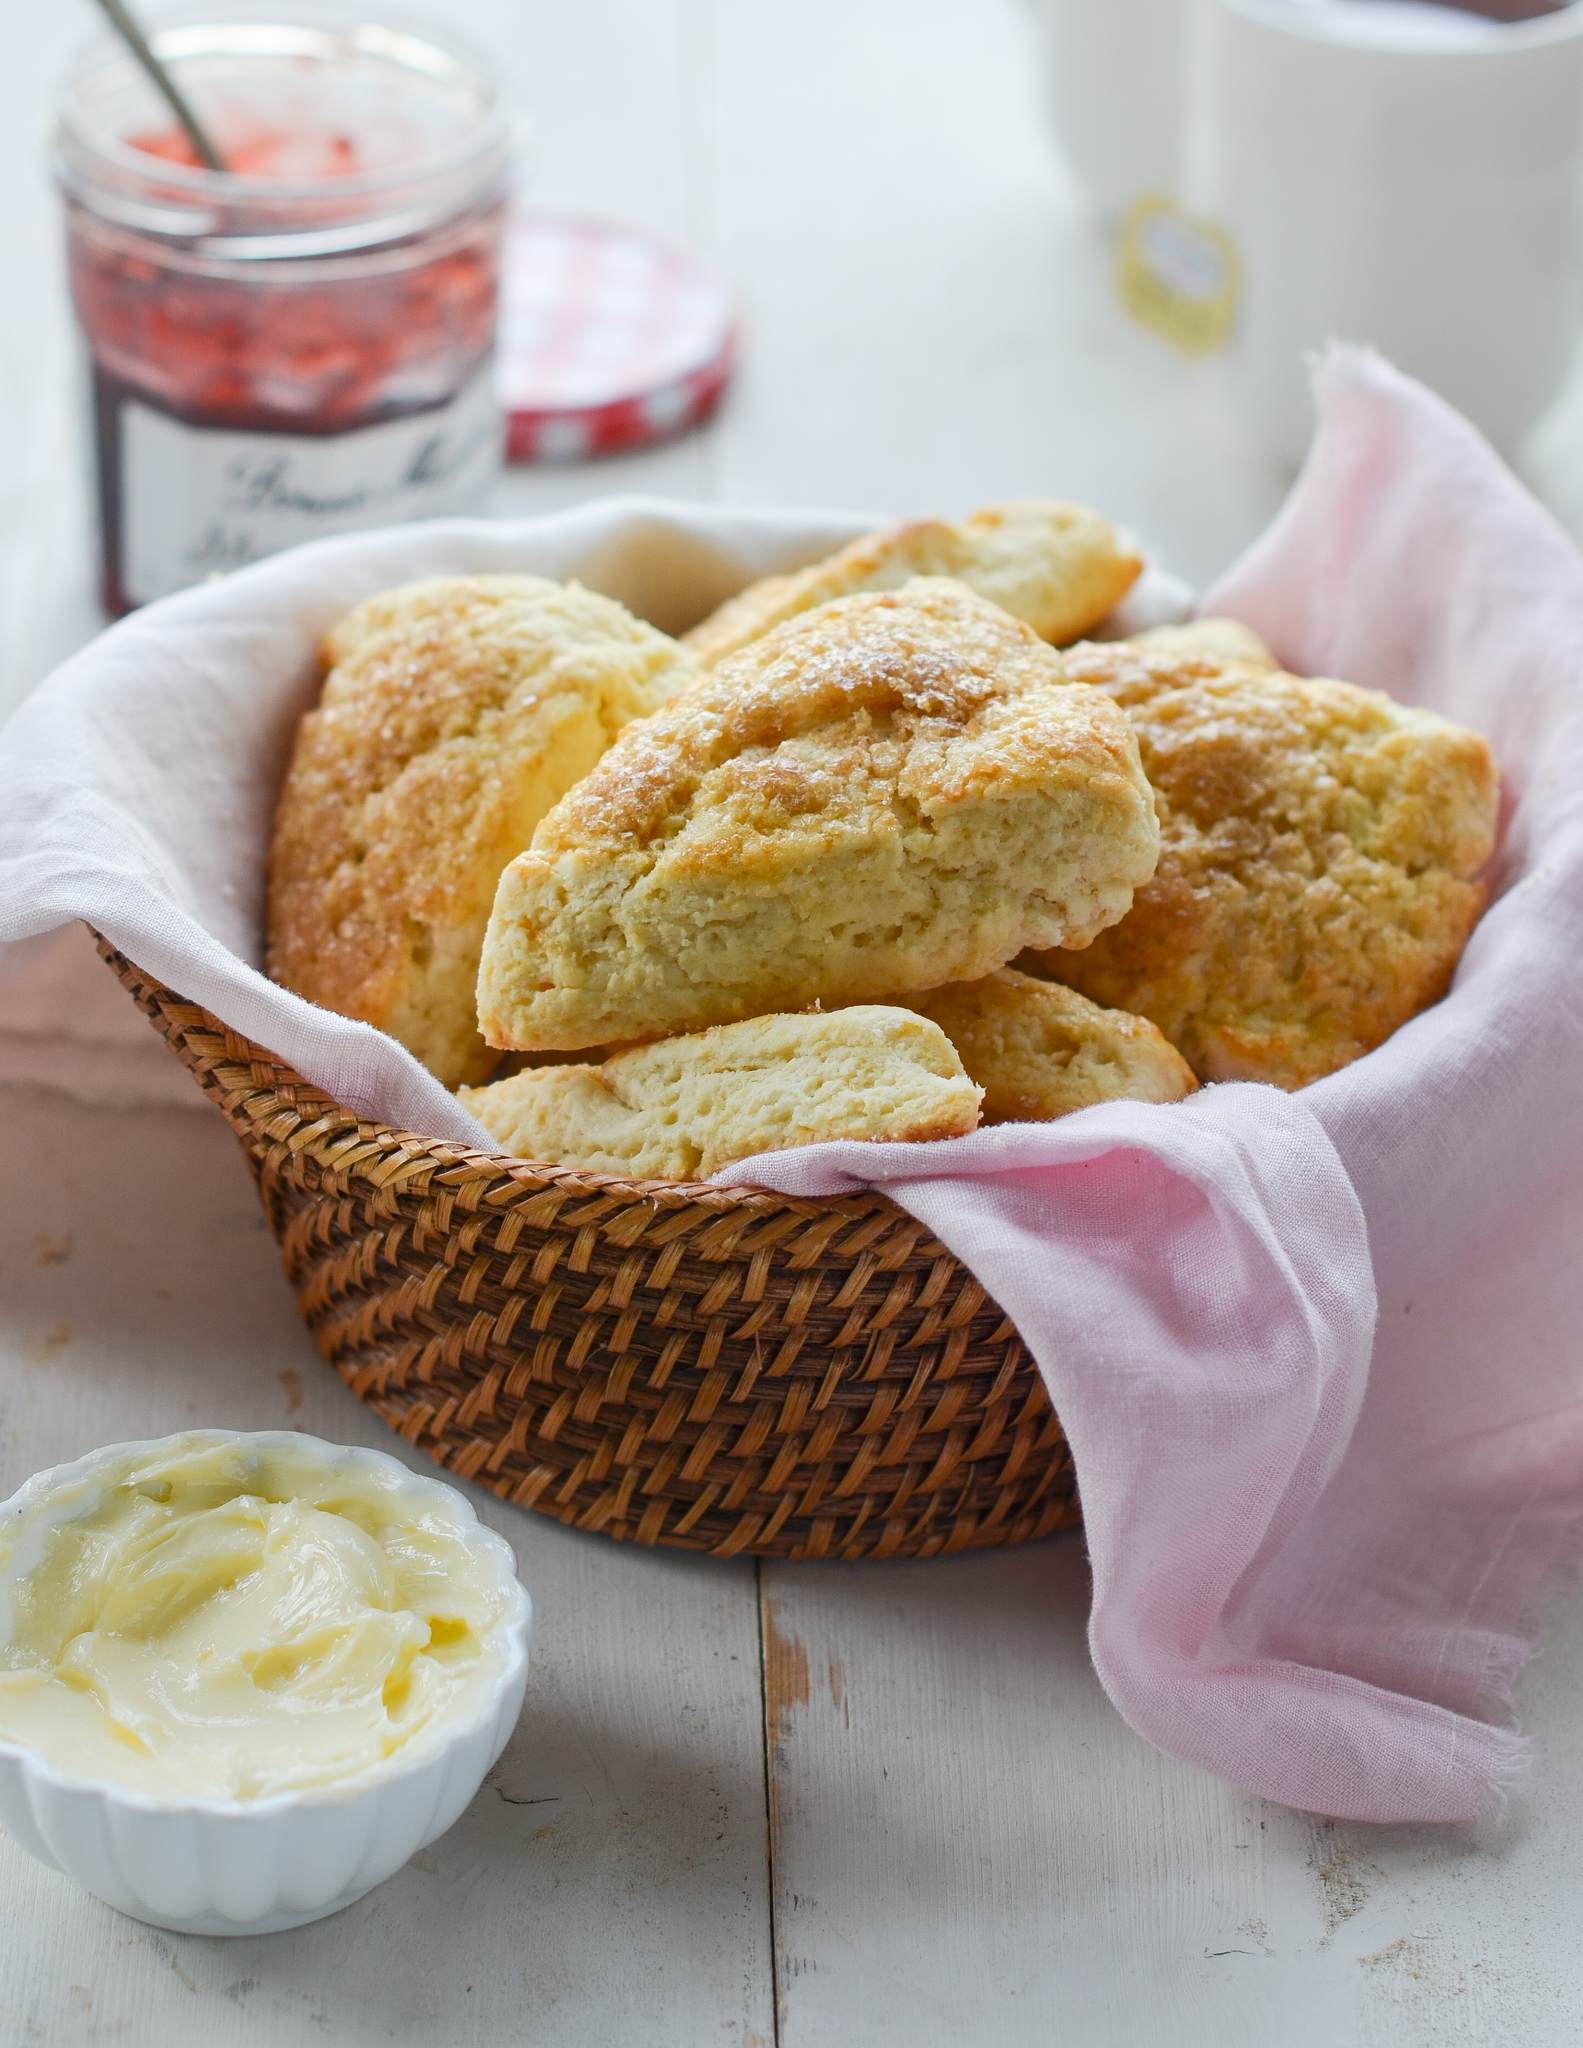 Easy Homemade Scones: A Delicious Breakfast or Tea-Time Treat